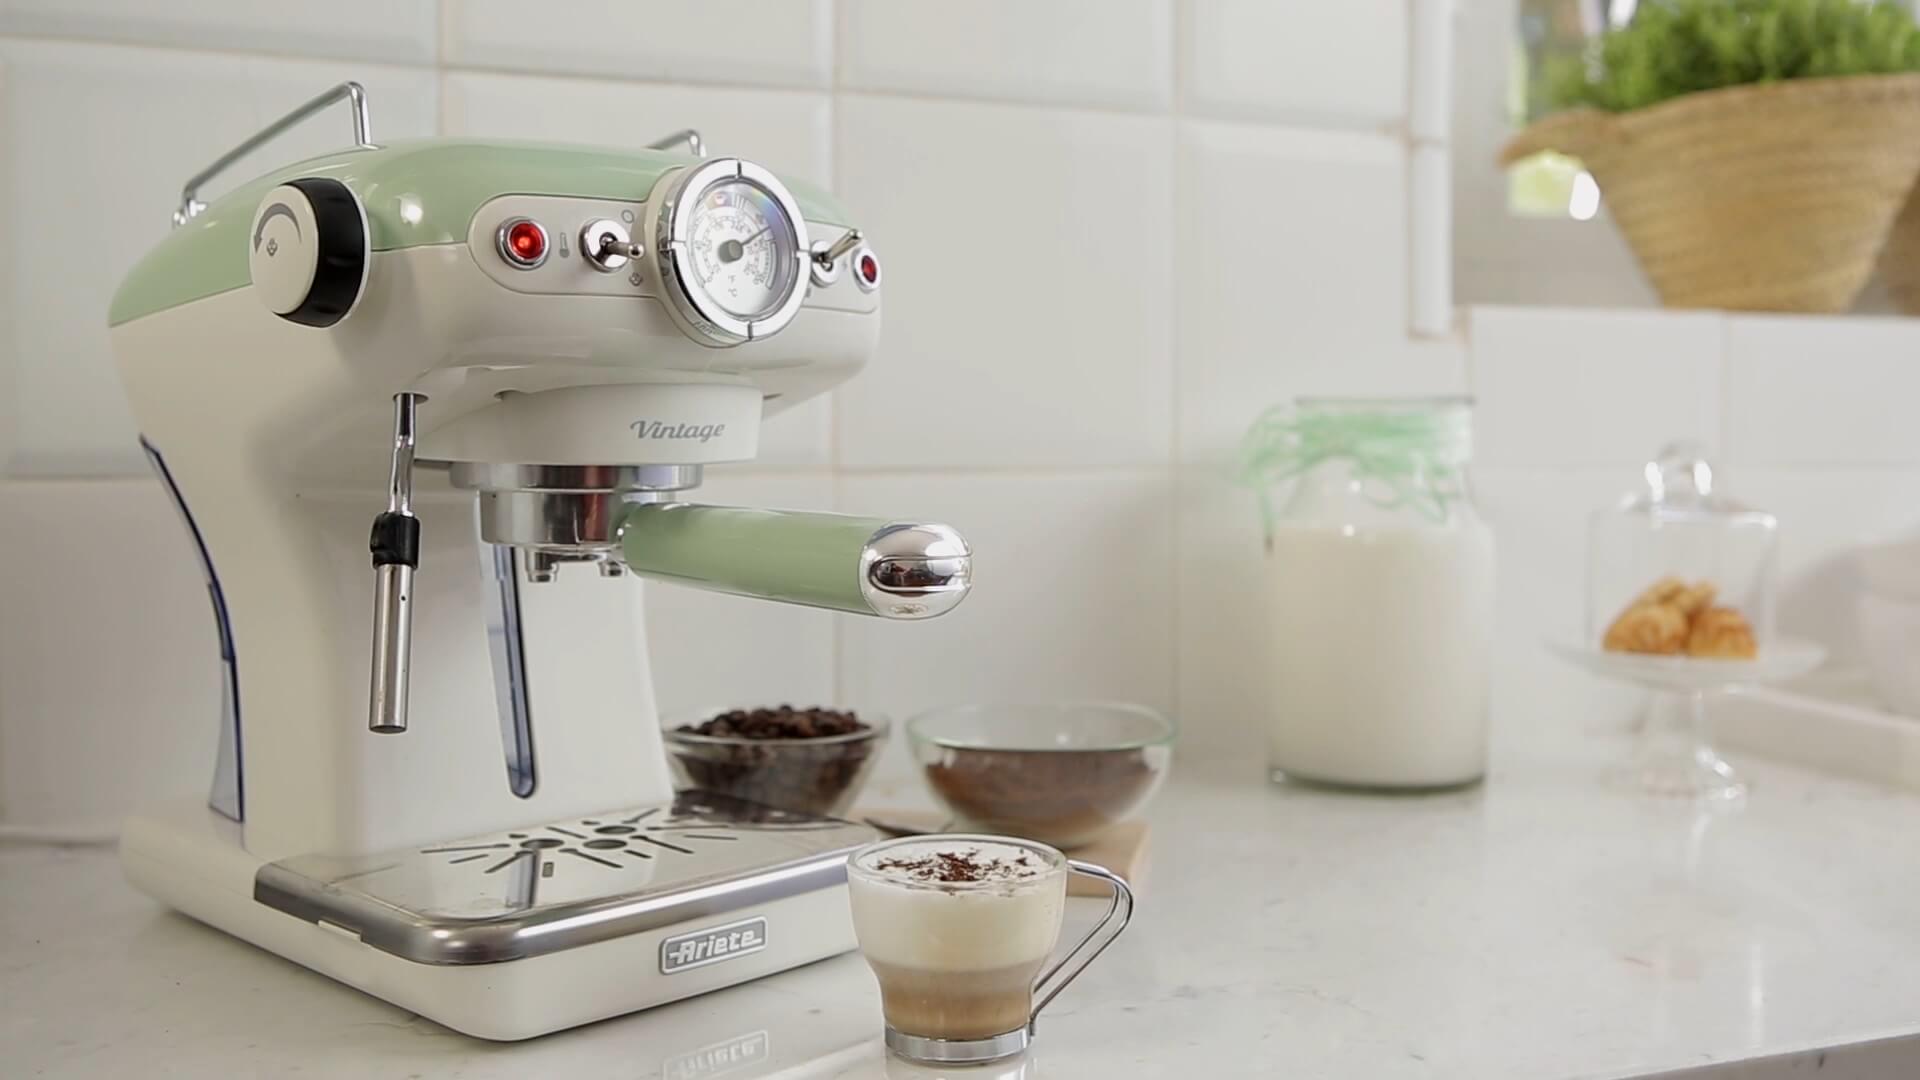 Ariete Vintage Milk Frother, Who doesn't love an instant froth for your  cuppa? Enjoy being your own barista with Ariete! ☕️ Get Ariete's Vintage  Milk Frother here